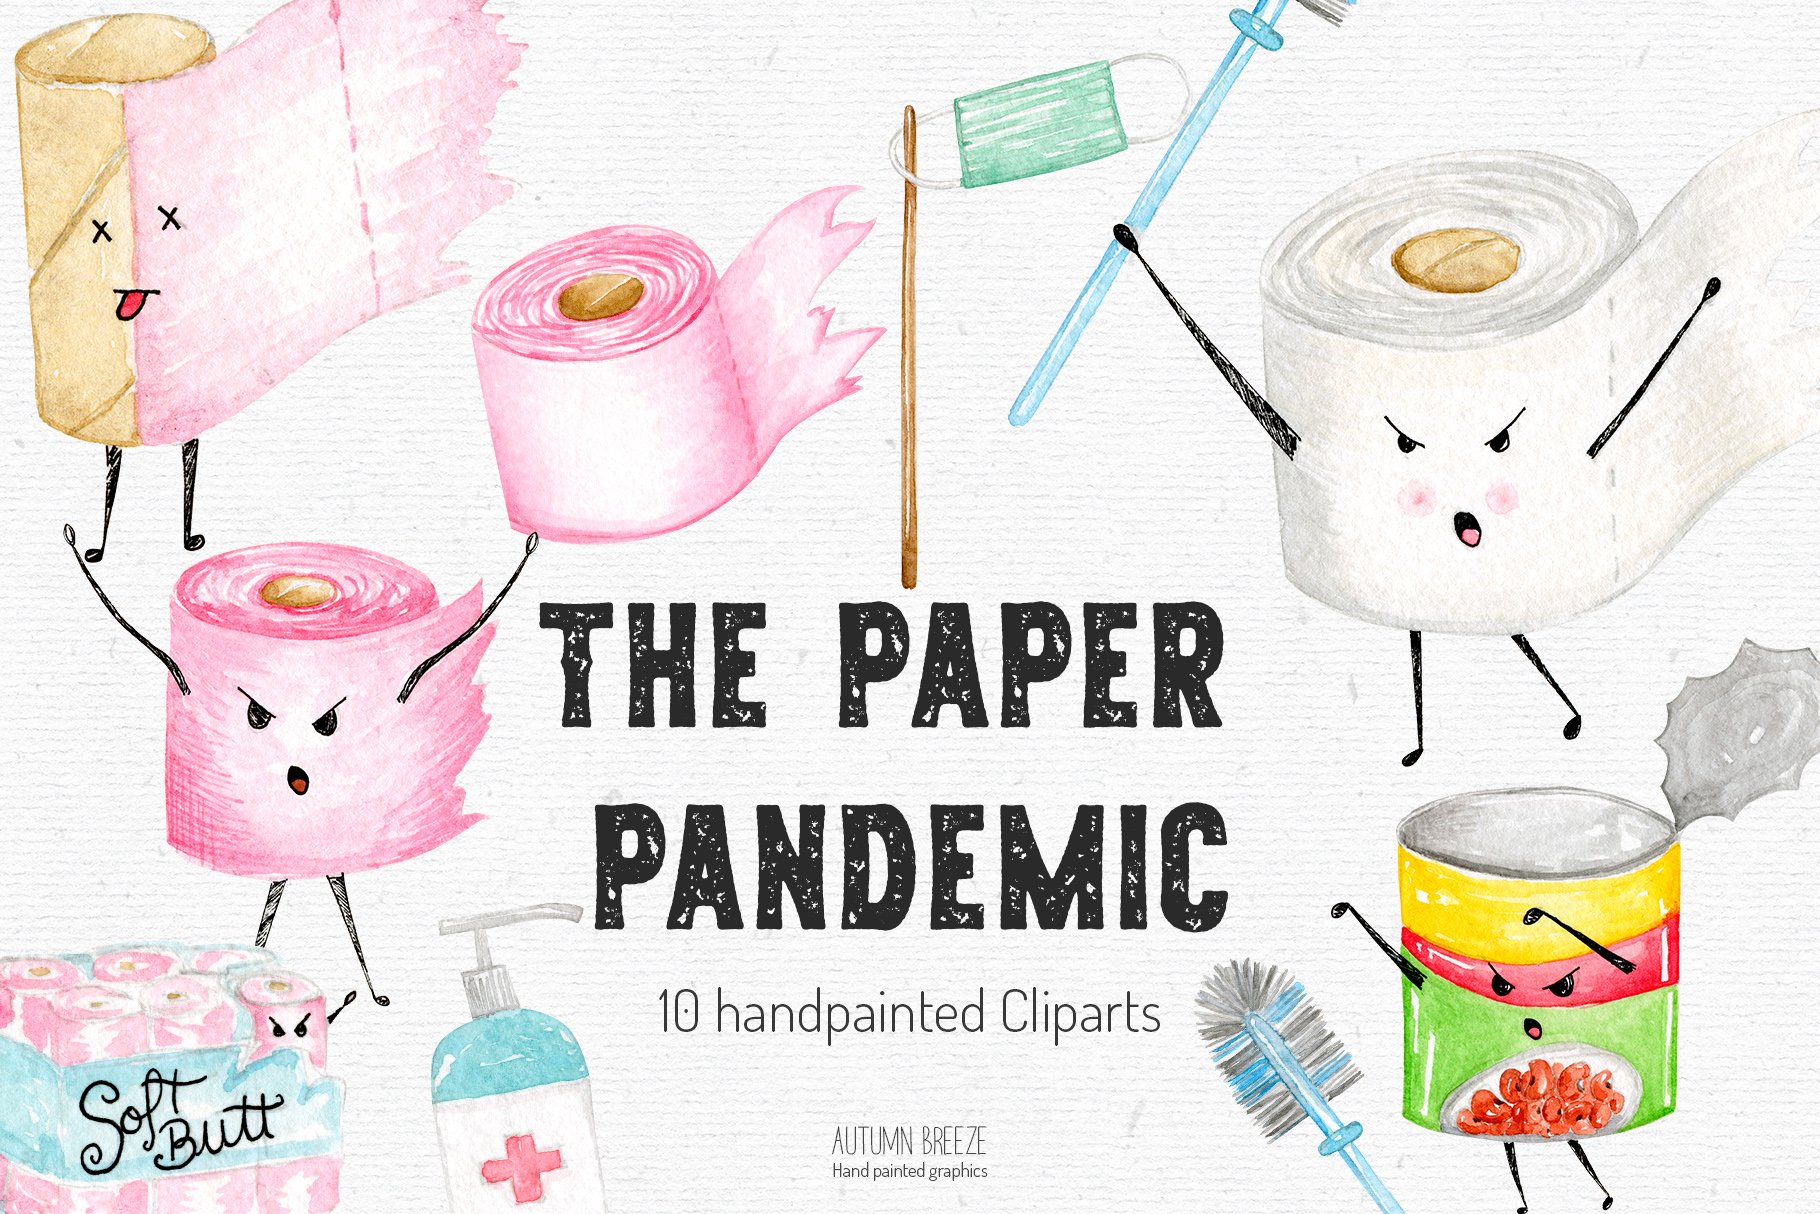 The Paper Pandemic Clipart cover image.